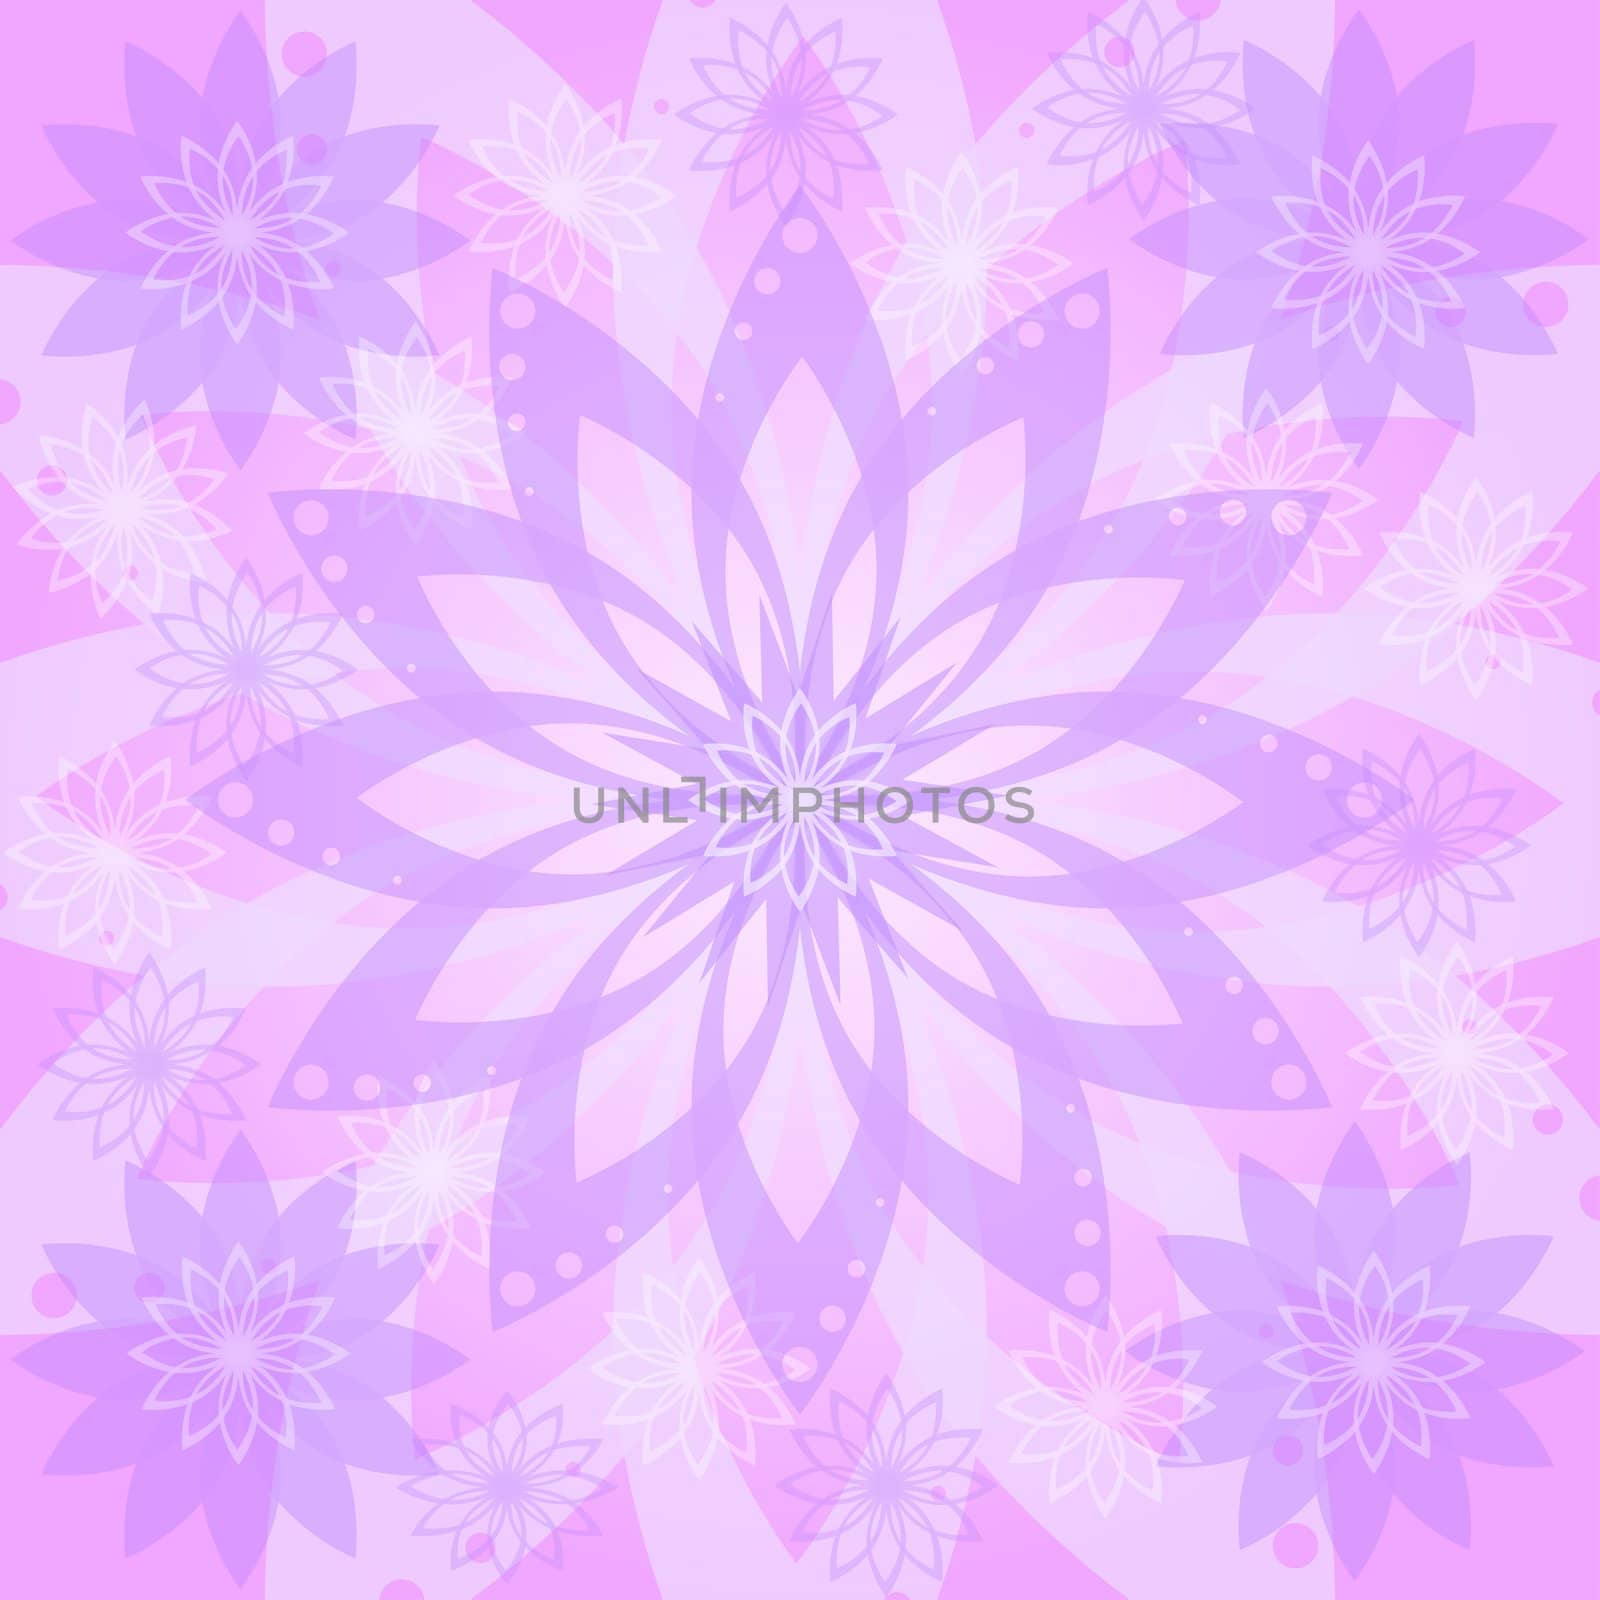 Abstract pink, lilac and white floral background: flowers silhouettes and contours